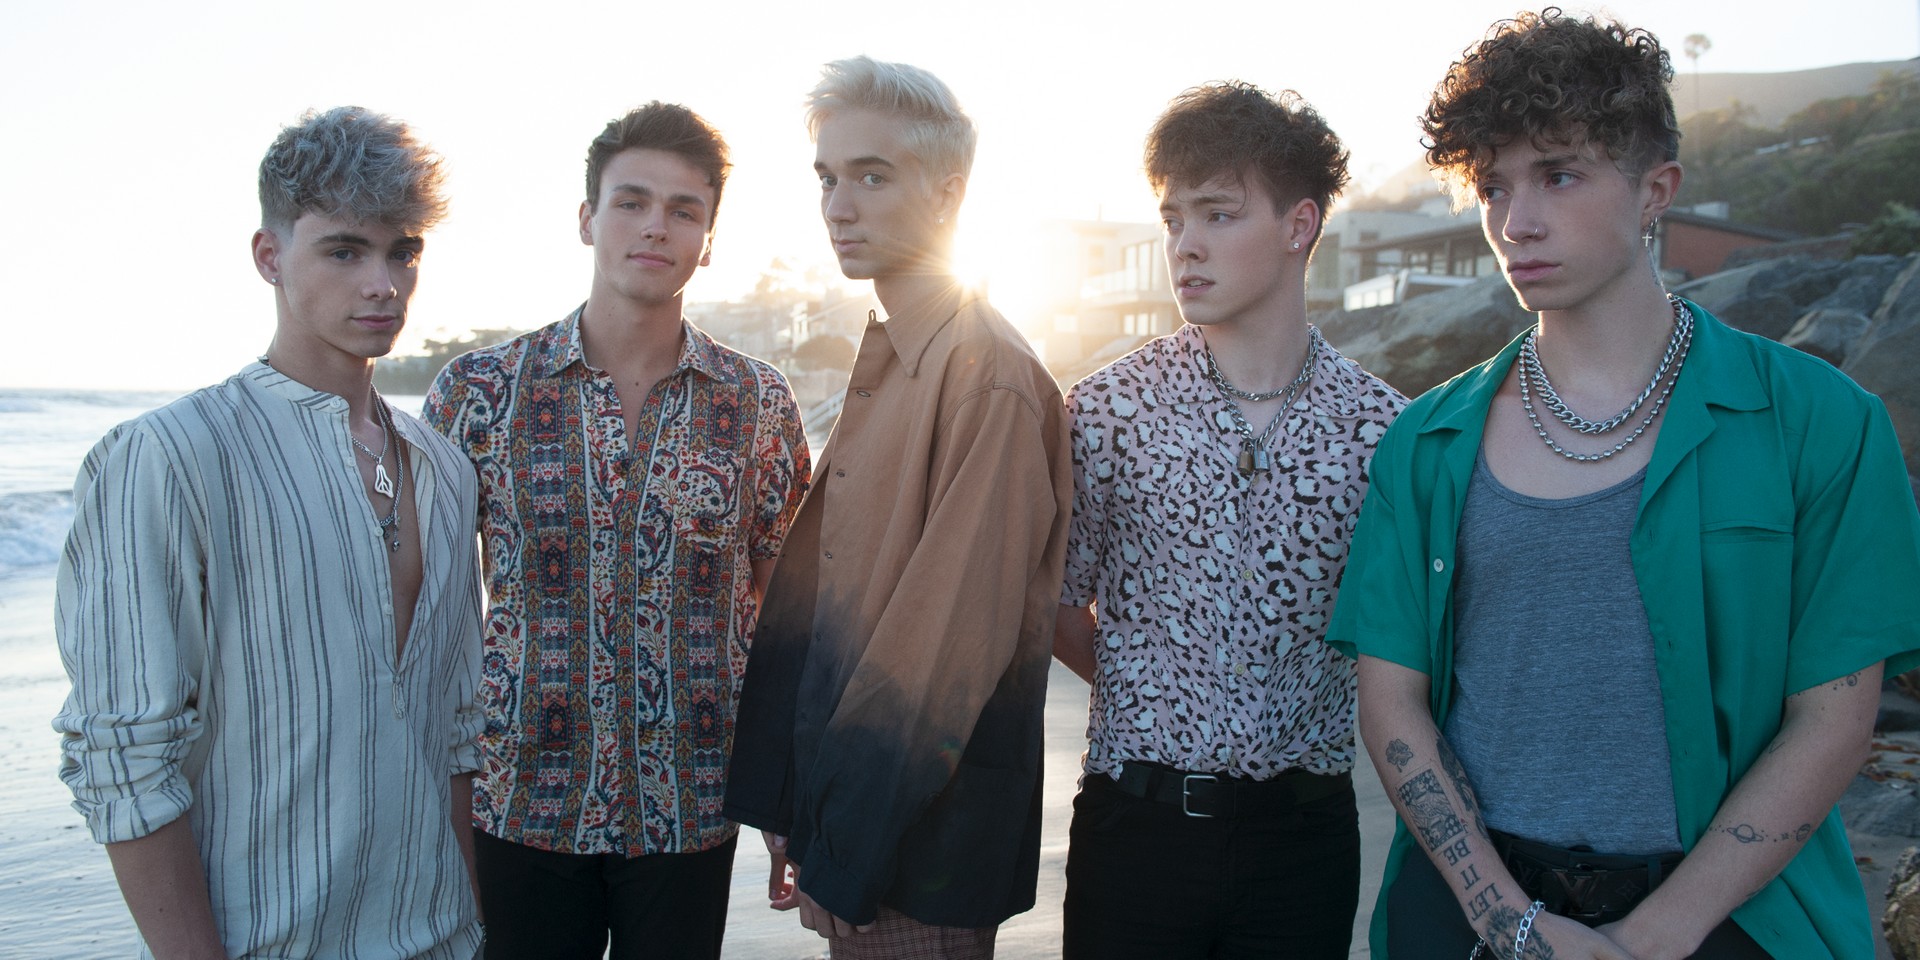 "The guys and I are slightly different from most boy bands that have been out there": An interview with Jack Avery of Why Don't We